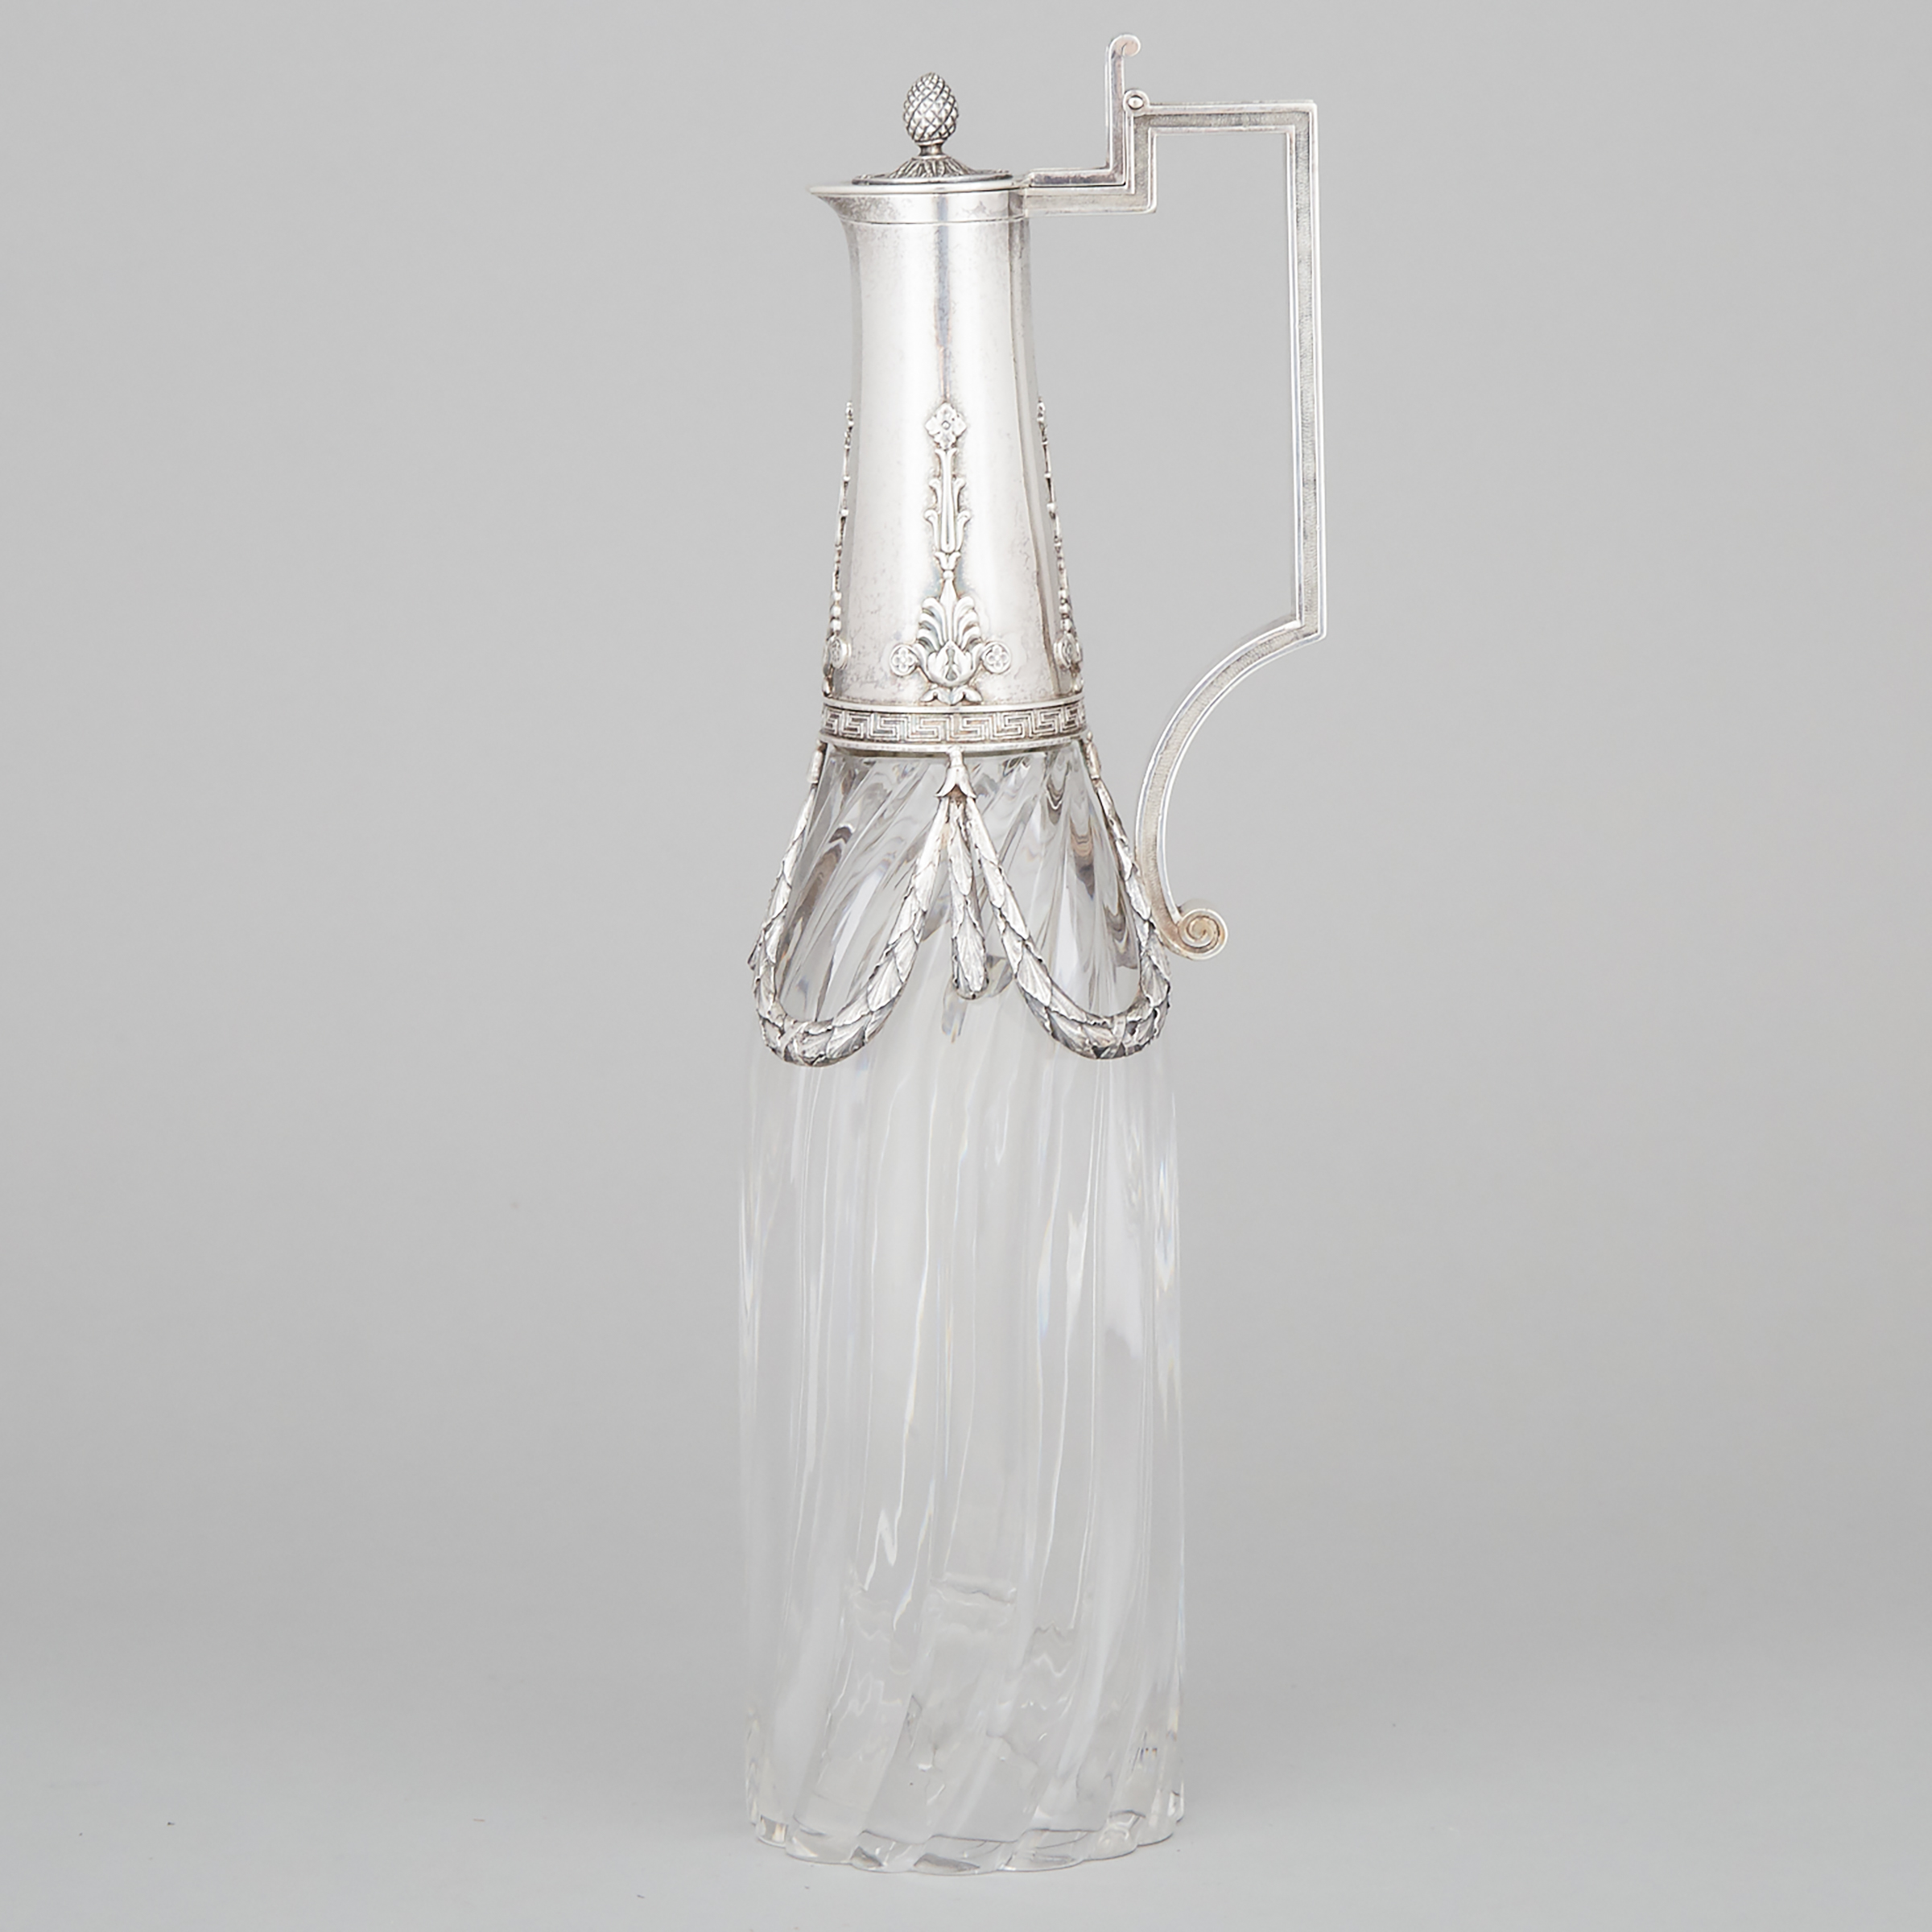 Russian Silver Mounted Cut Glass Wine Jug, Karl Fabergé, Moscow, 1899-1908